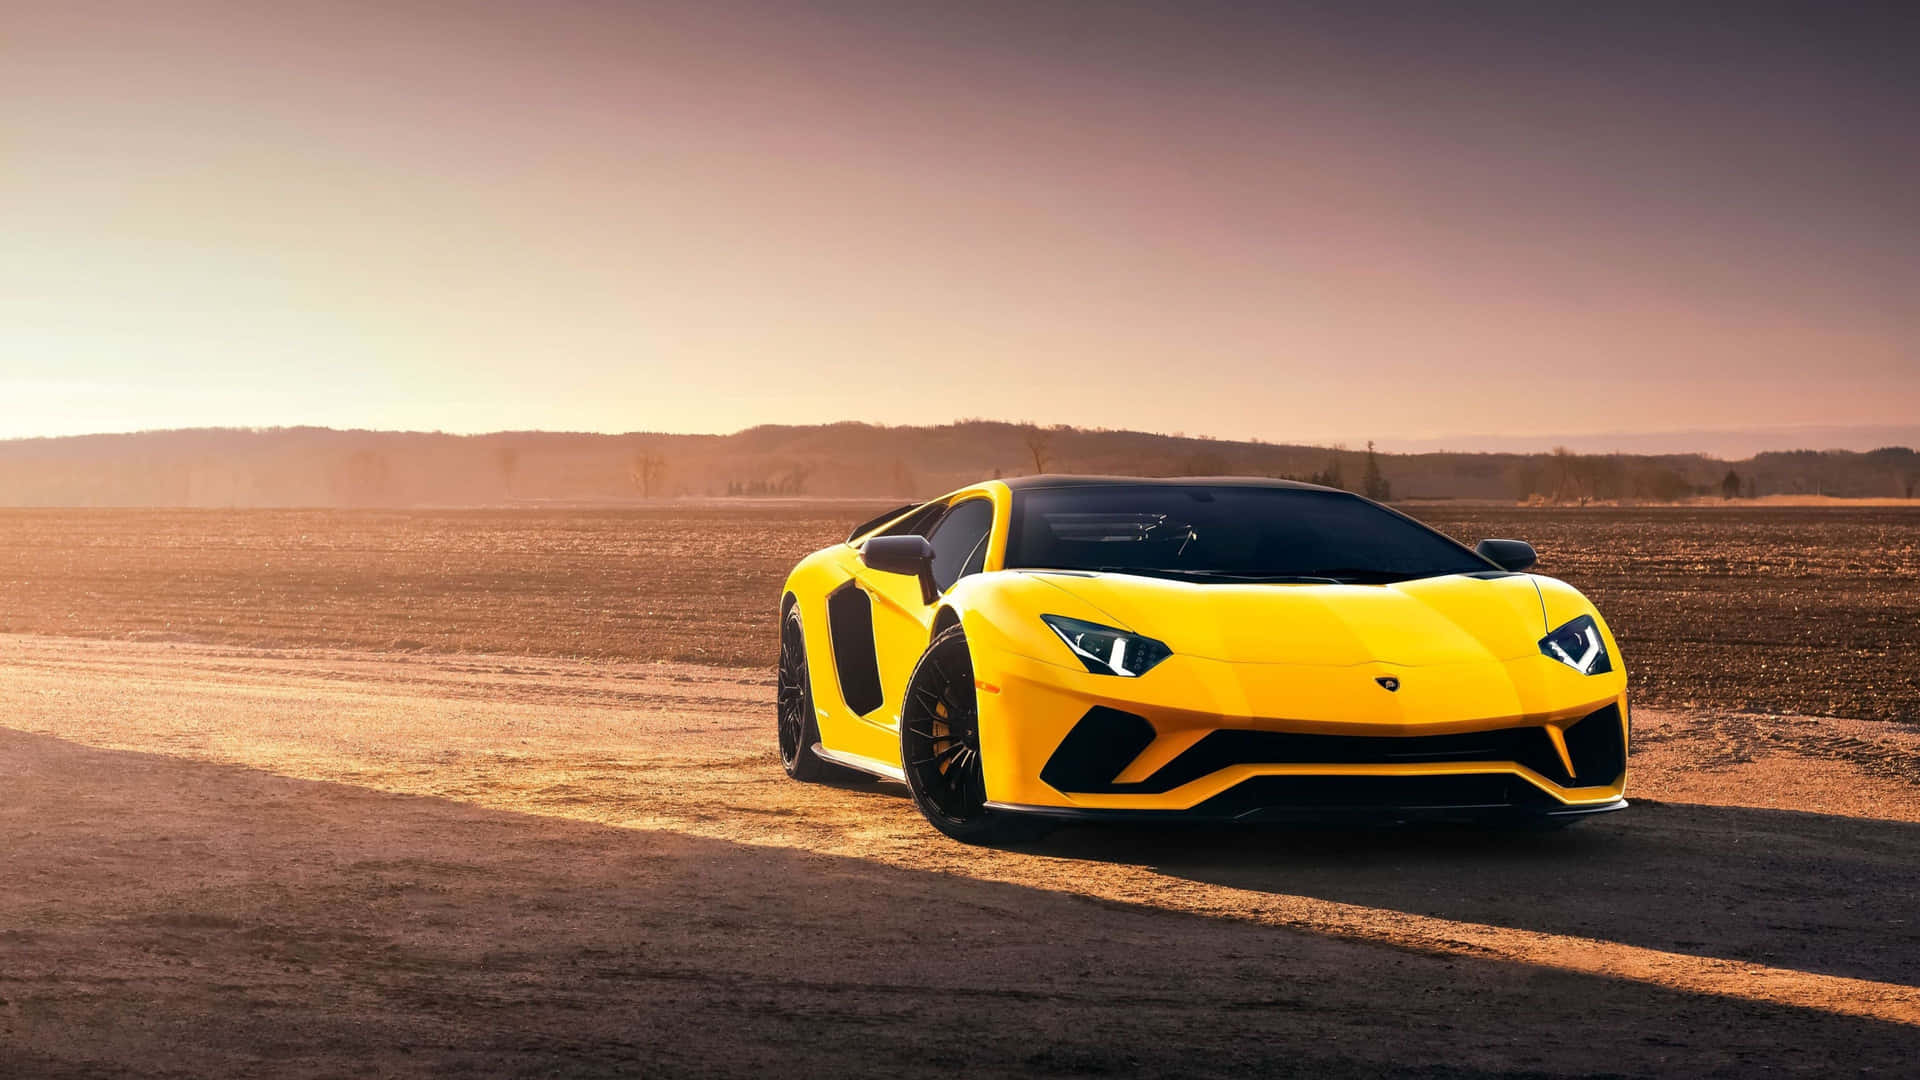 A Yellow Sports Car Is Parked In The Desert